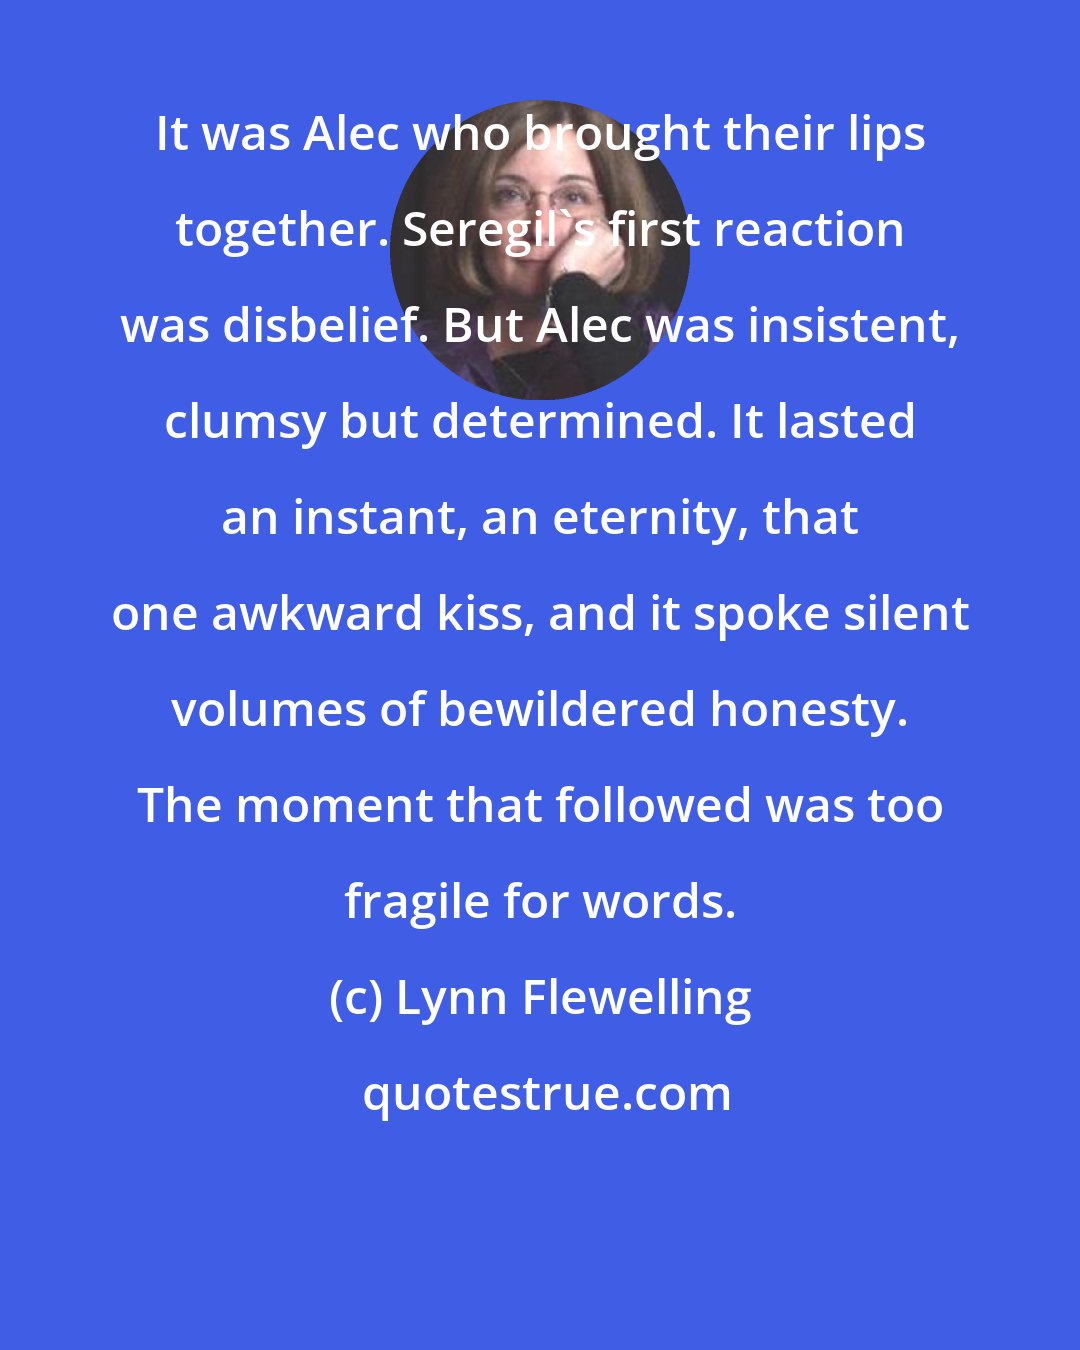 Lynn Flewelling: It was Alec who brought their lips together. Seregil's first reaction was disbelief. But Alec was insistent, clumsy but determined. It lasted an instant, an eternity, that one awkward kiss, and it spoke silent volumes of bewildered honesty. The moment that followed was too fragile for words.